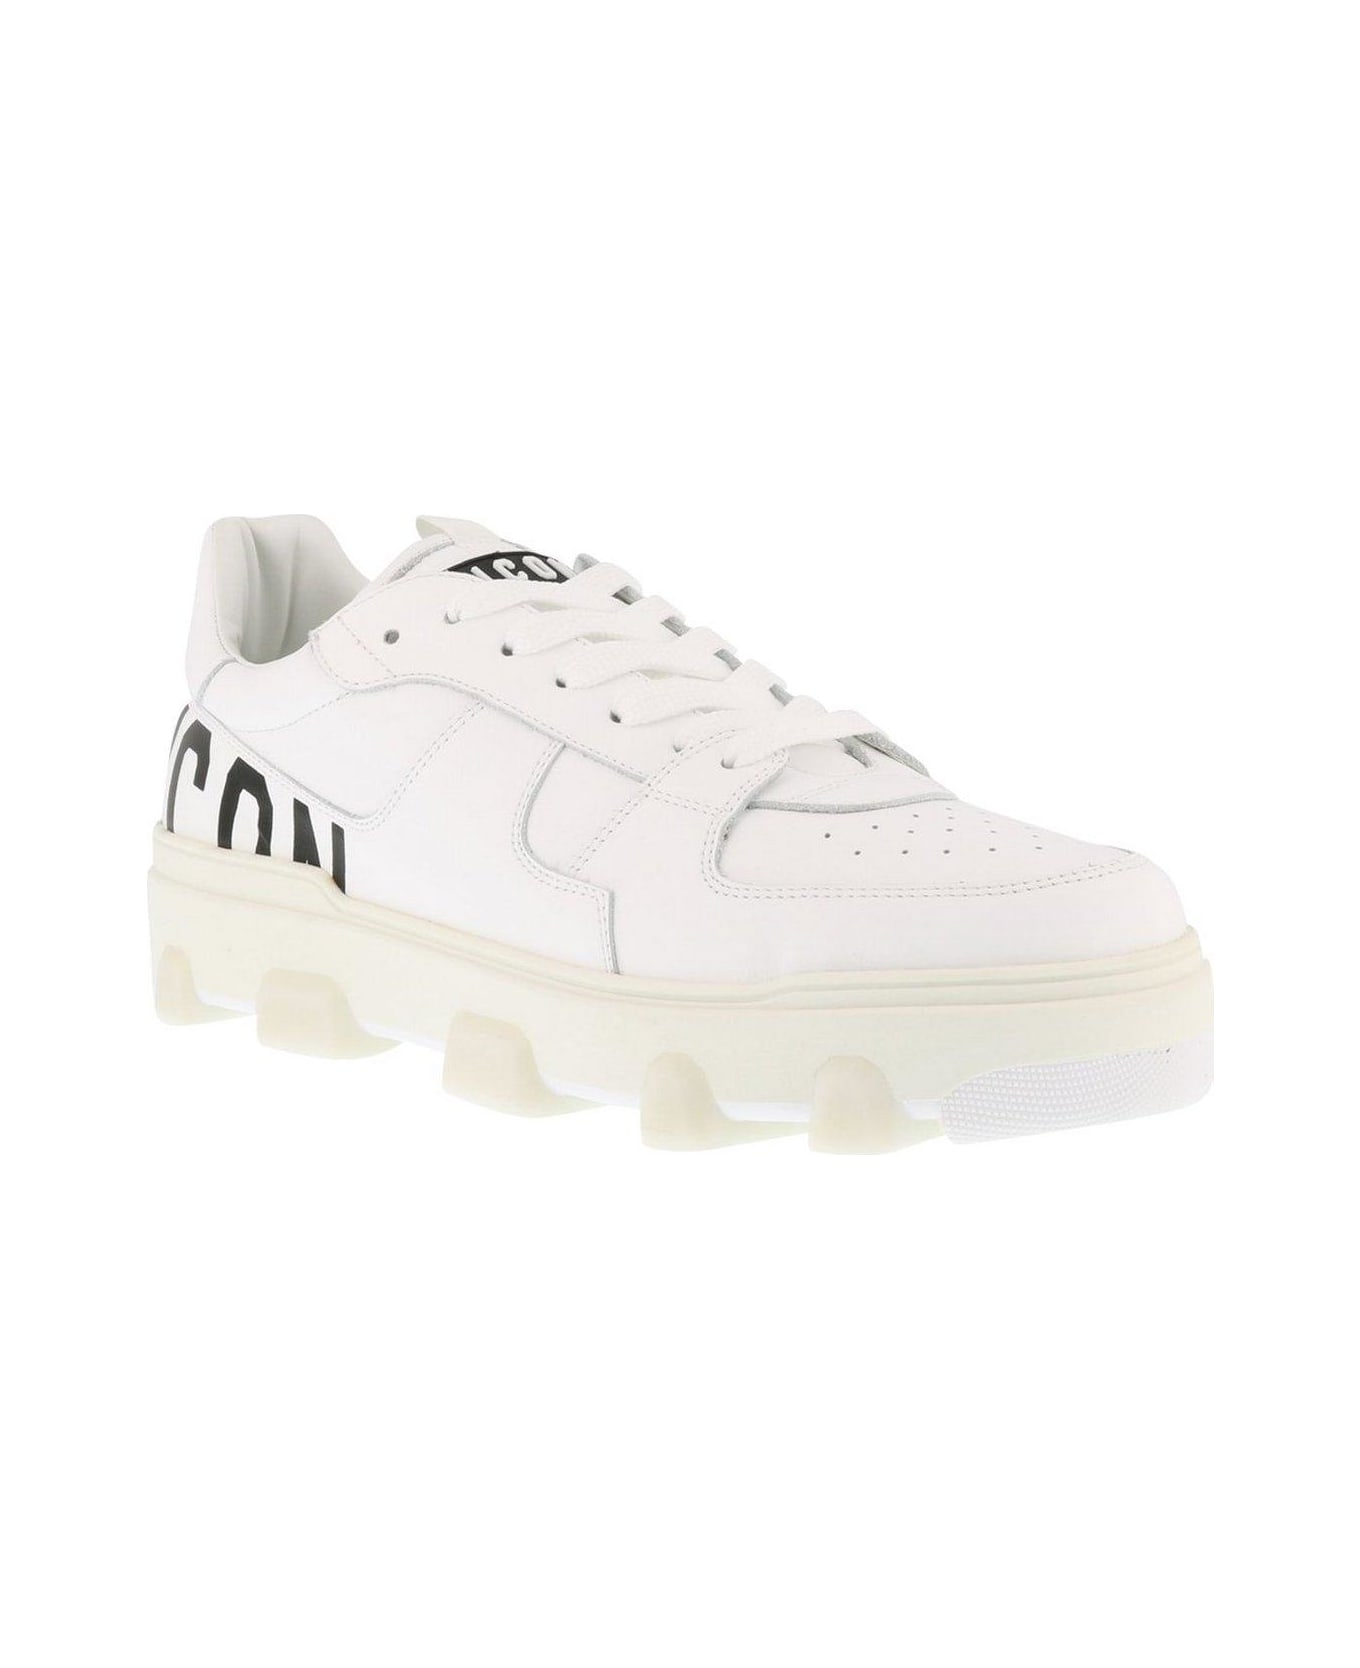 Dsquared2 Logo Printed Low-top Sneakers - White スニーカー